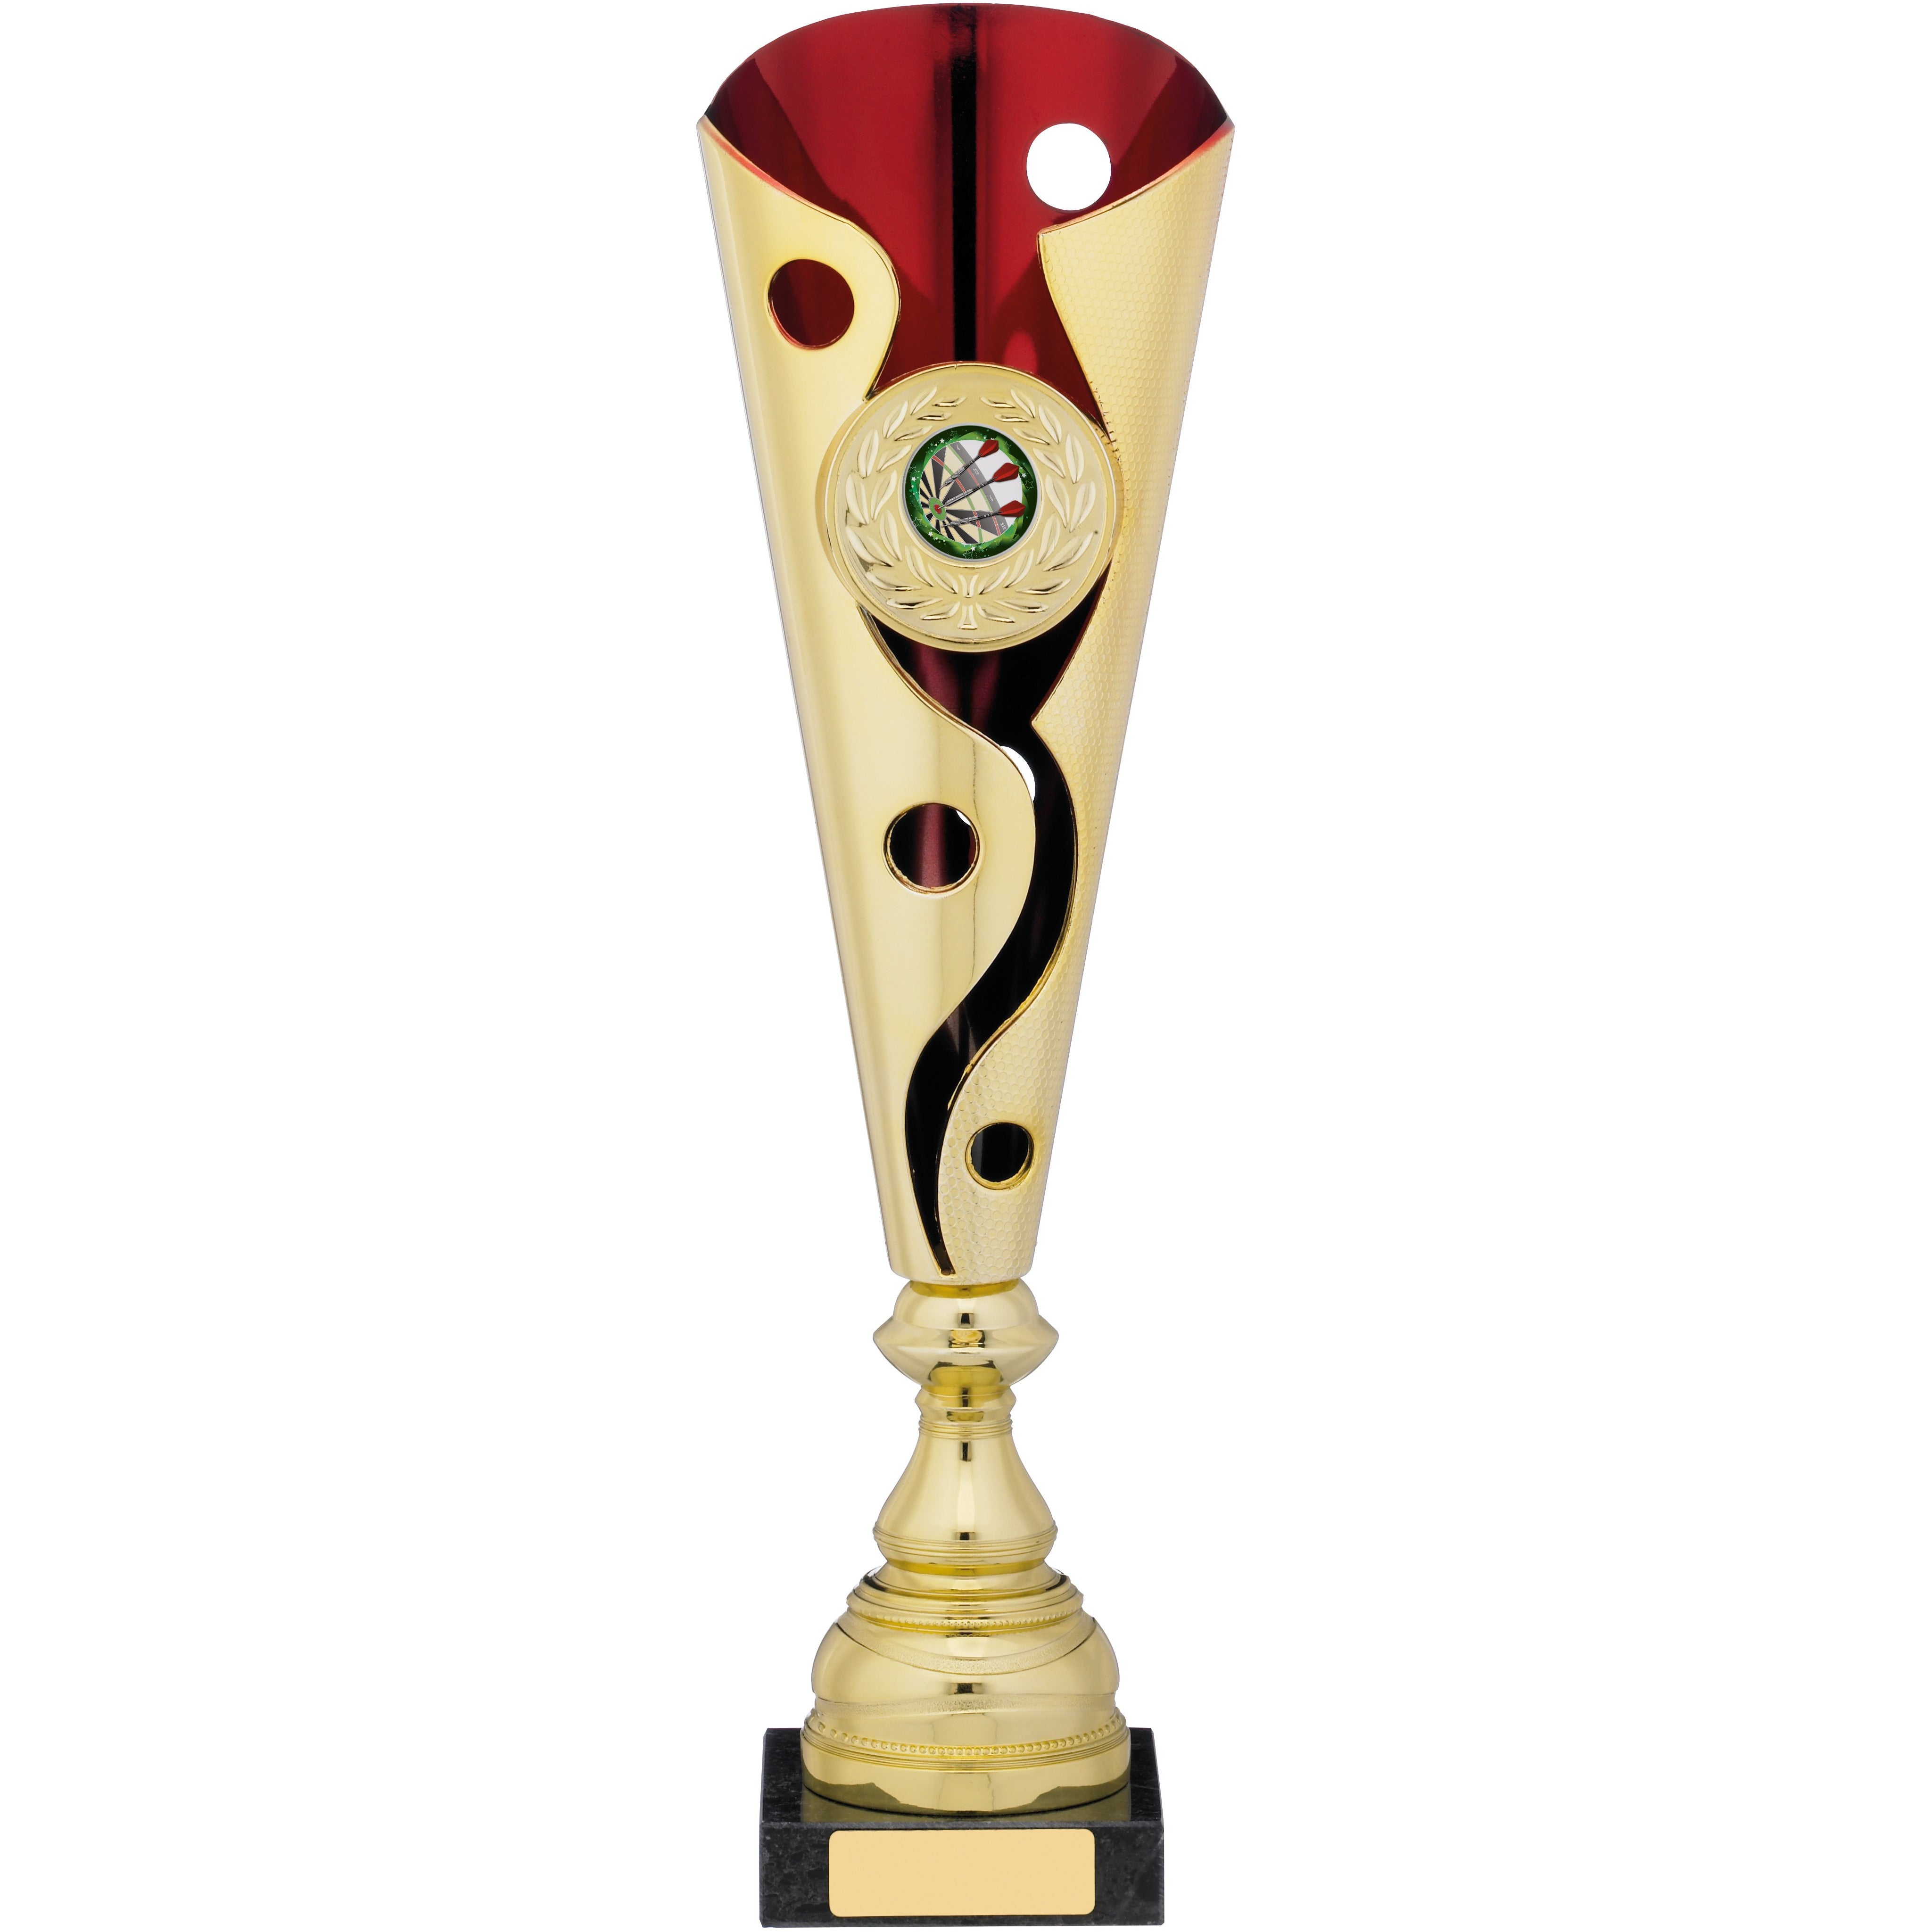 Gold & Red Modern Trophy Cup with Circles and Swirl Cutout